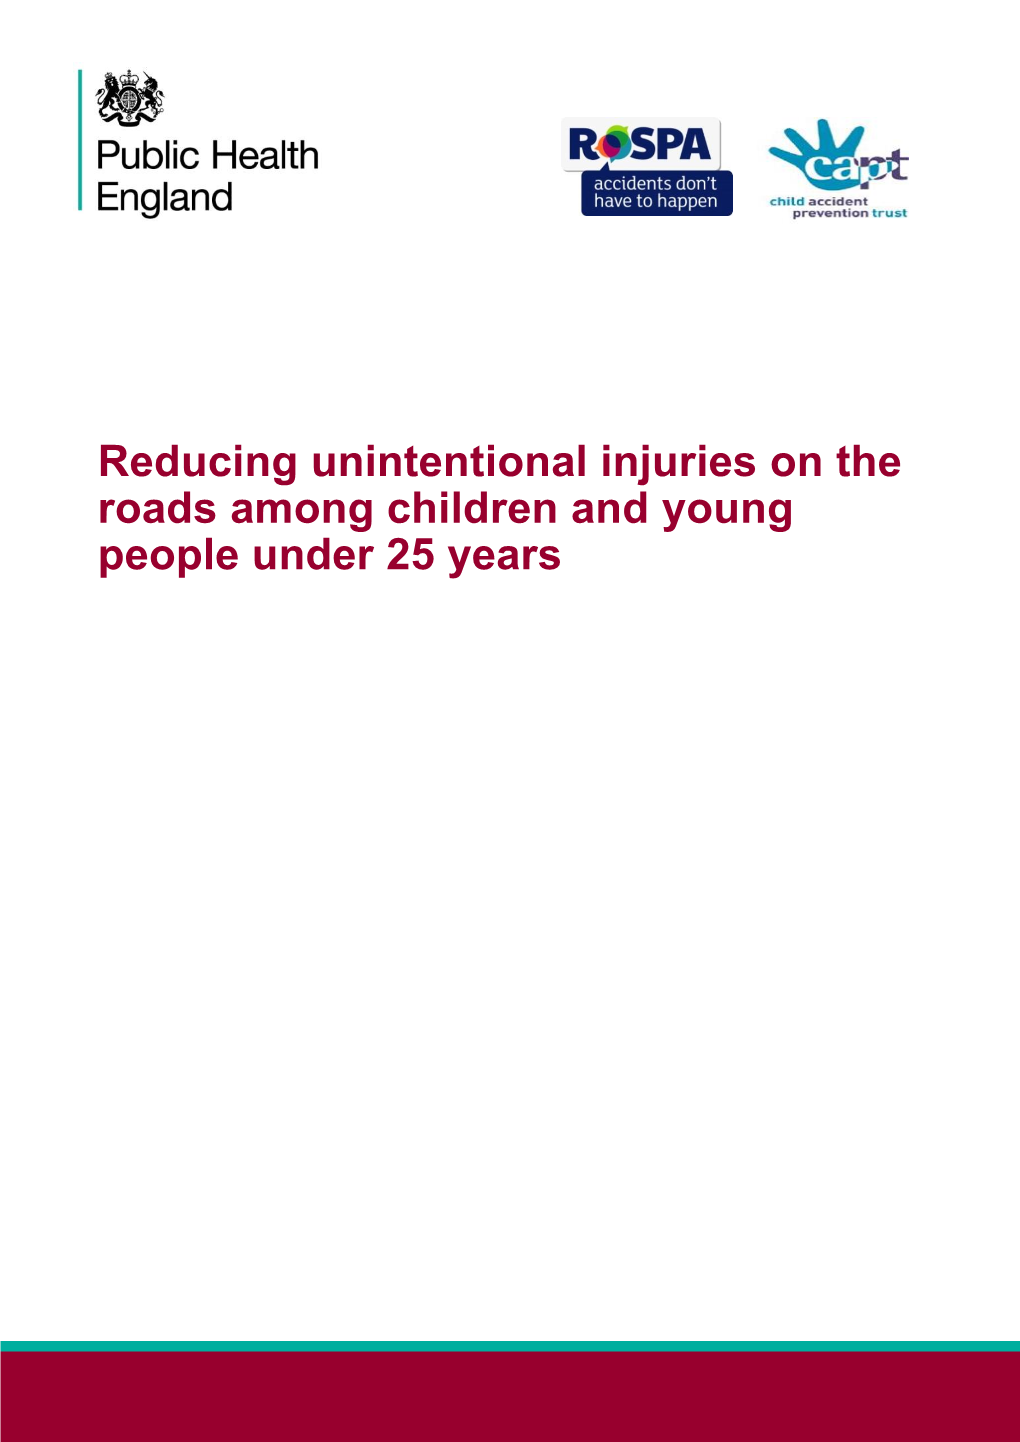 Reducing Unintentional Injuries on the Roads Among Children and Young People Under 25 Years